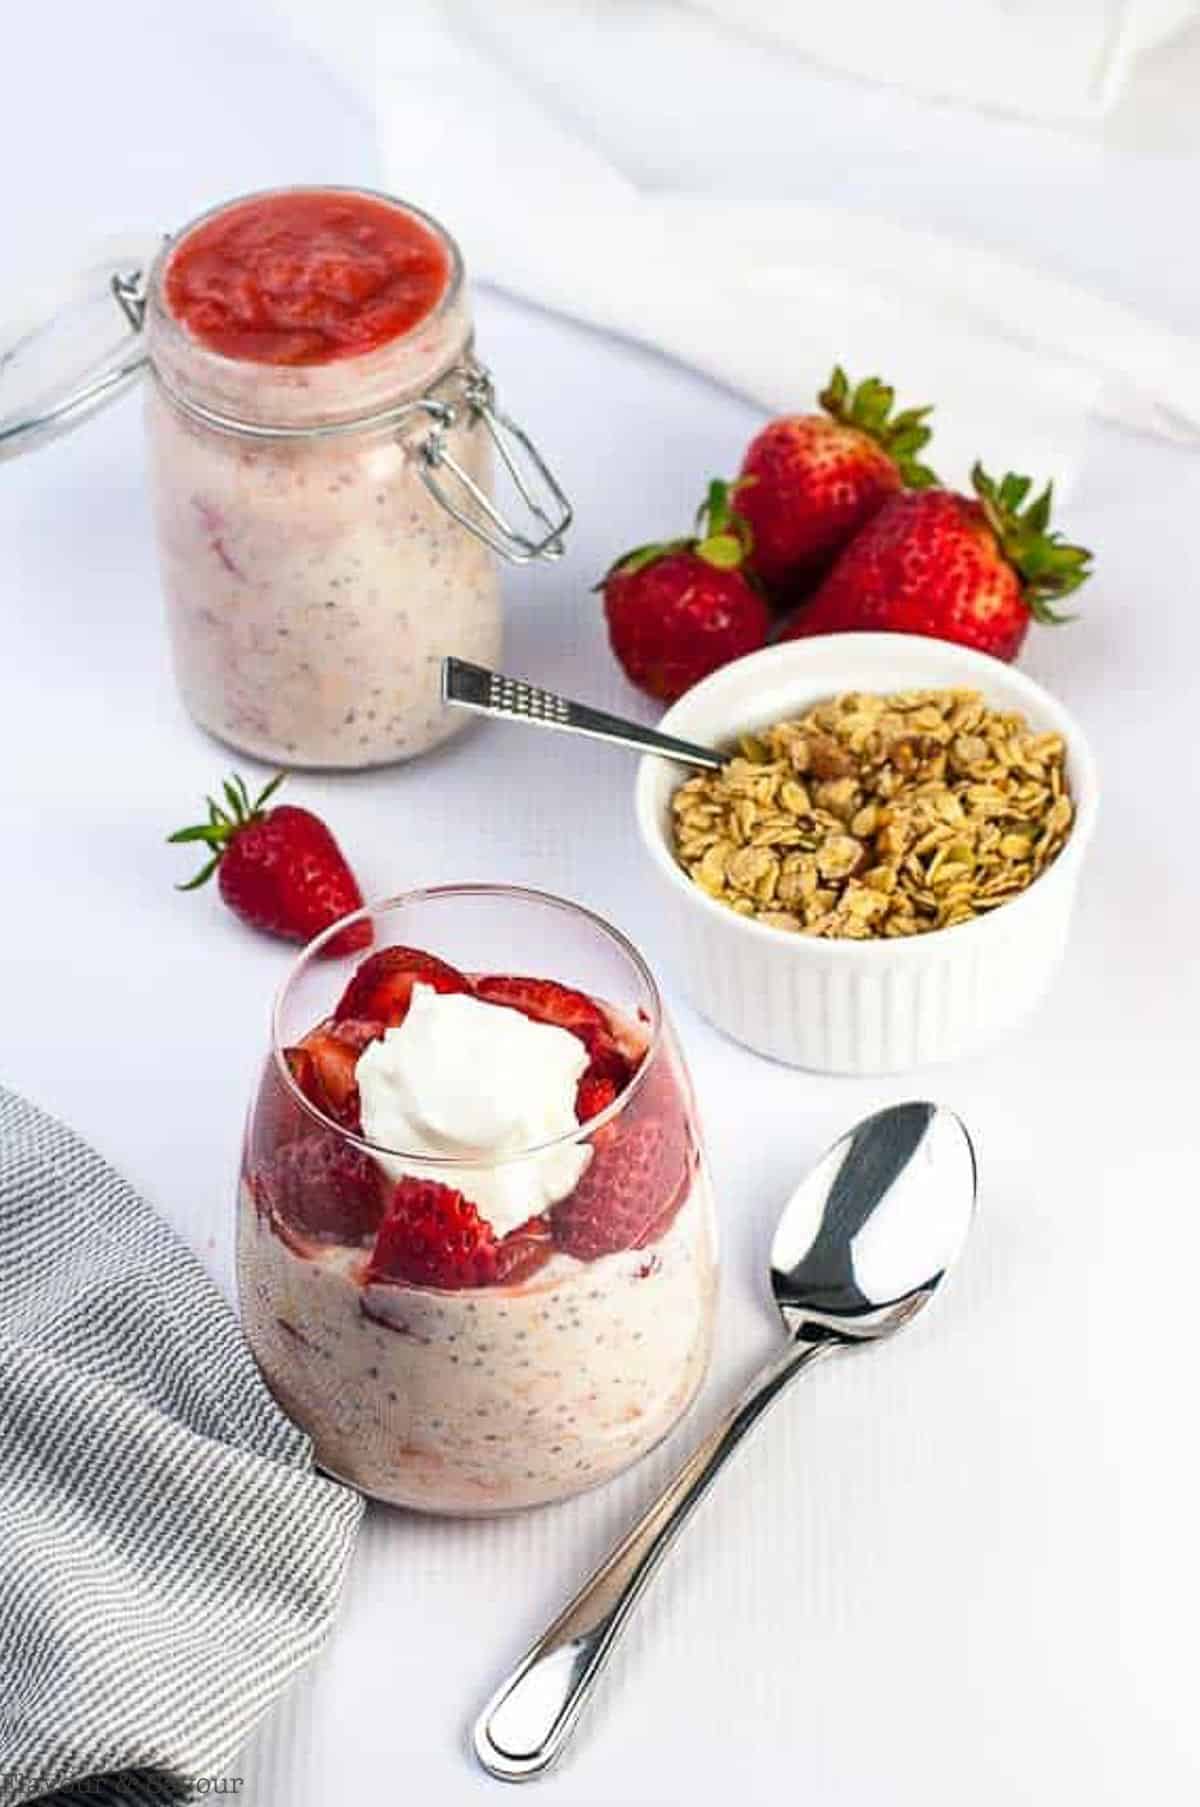 Strawberry Rhubarb overnight oats with fresh strawberries.